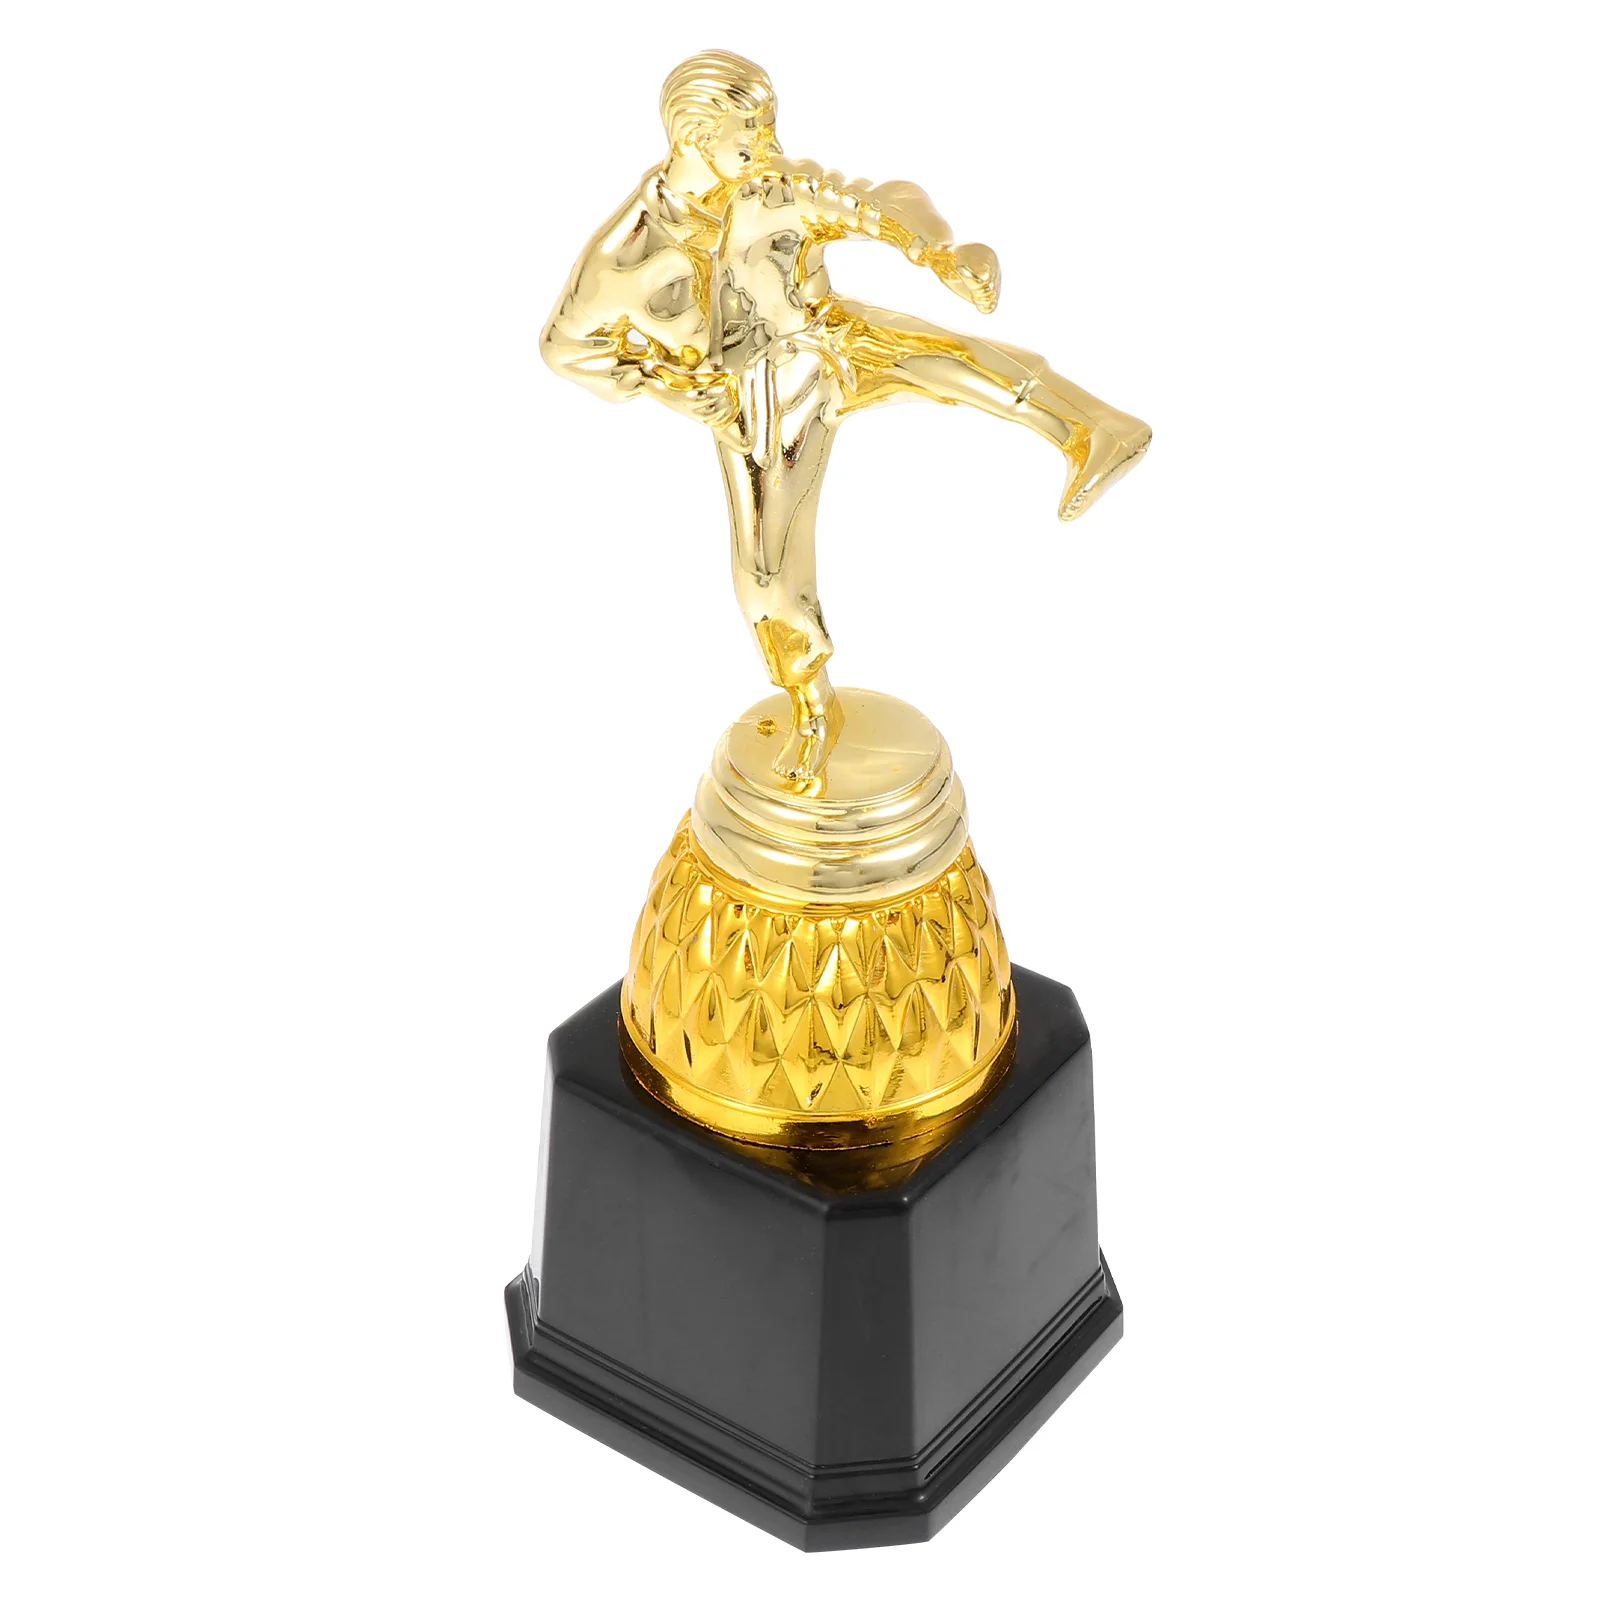 

77 Inch Award Trophy Cups, Taekwondo Trophies Toys Party Favors, Winning Prizes, Competitions for Kids and Adults